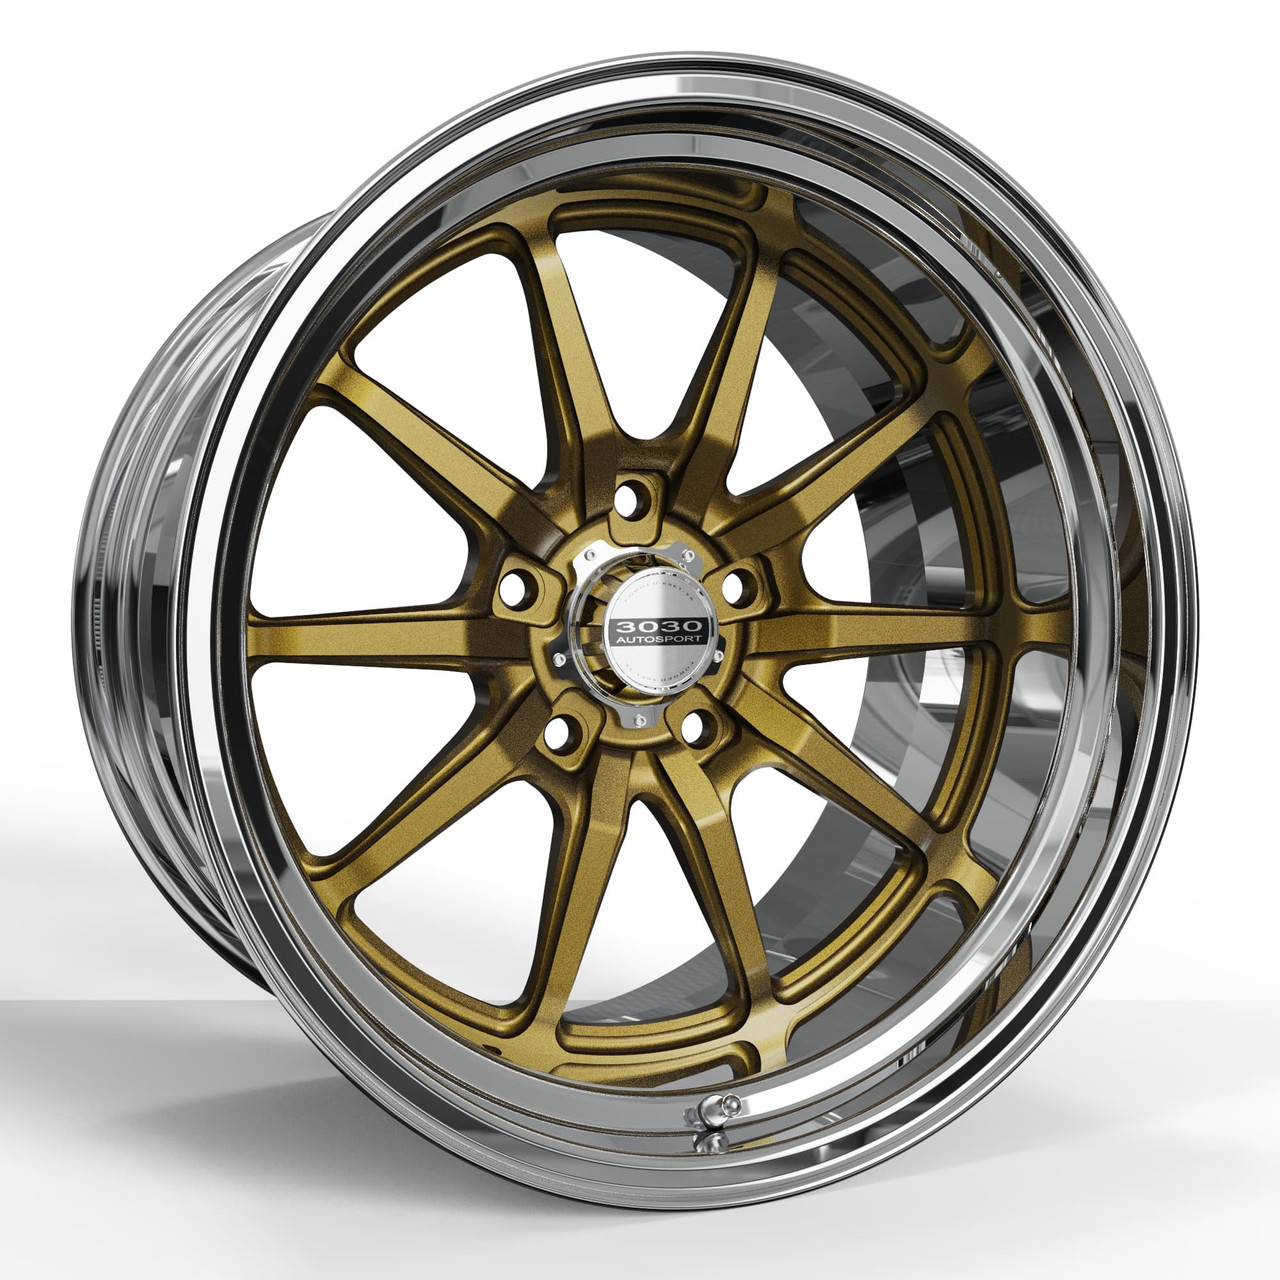 Forged aluminum muscle car wheels,vintage car wheels,3030autosport style F22